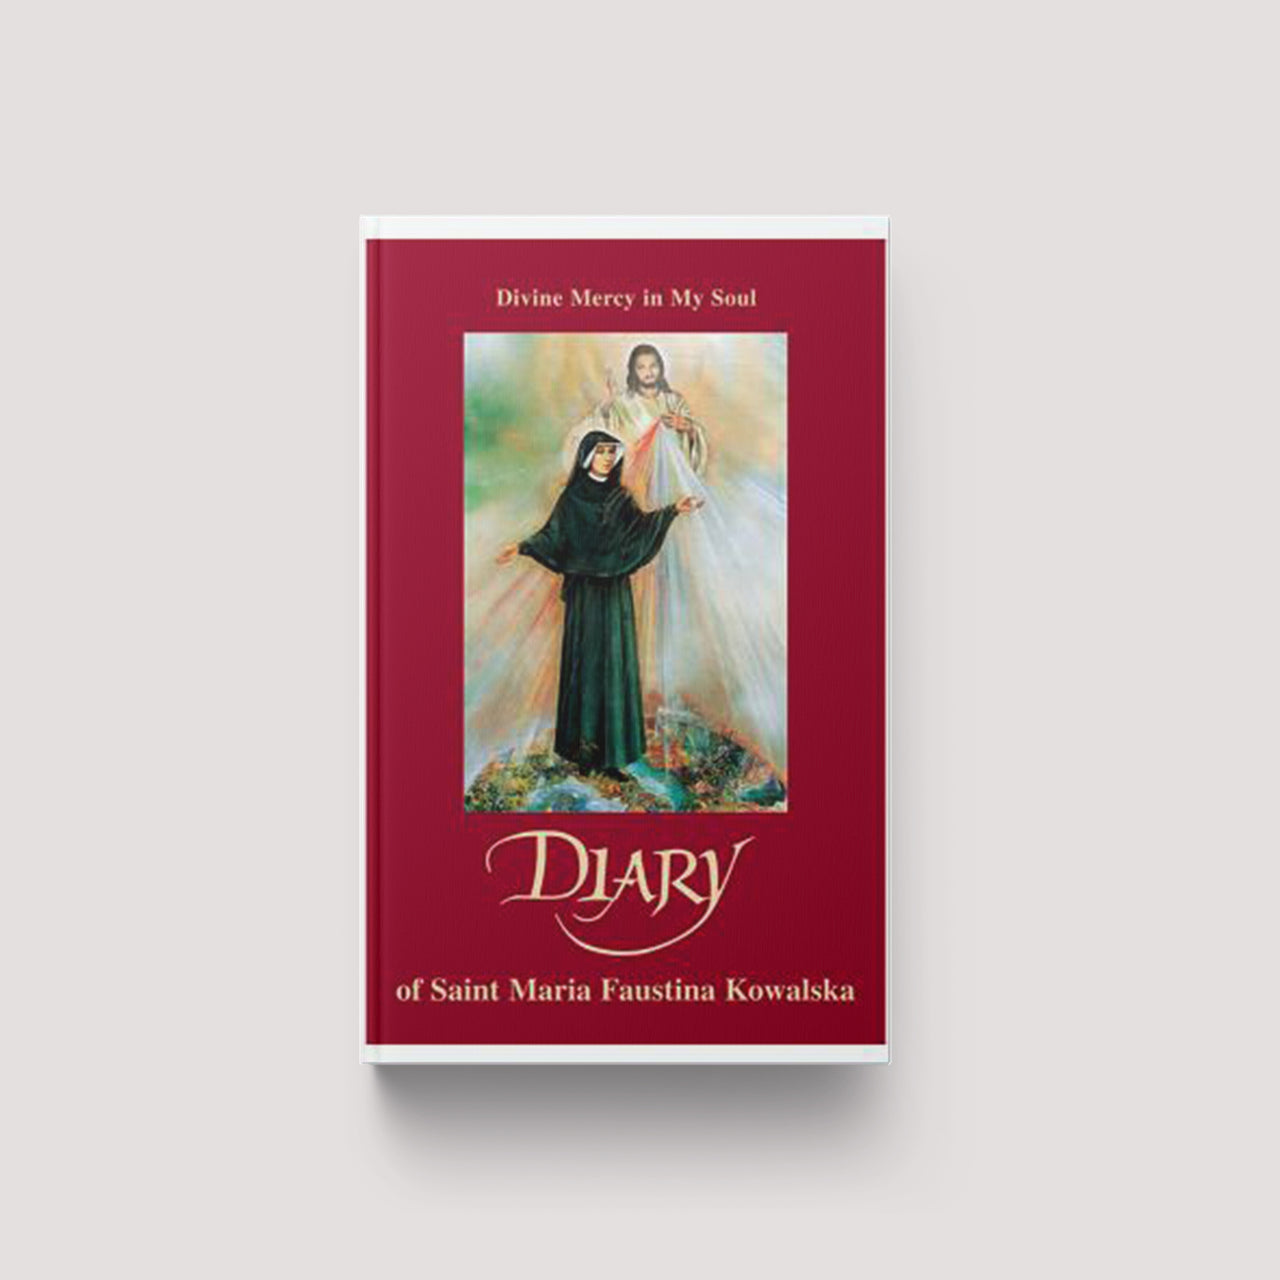 Diary: Divine Mercy in My Soul (large print)